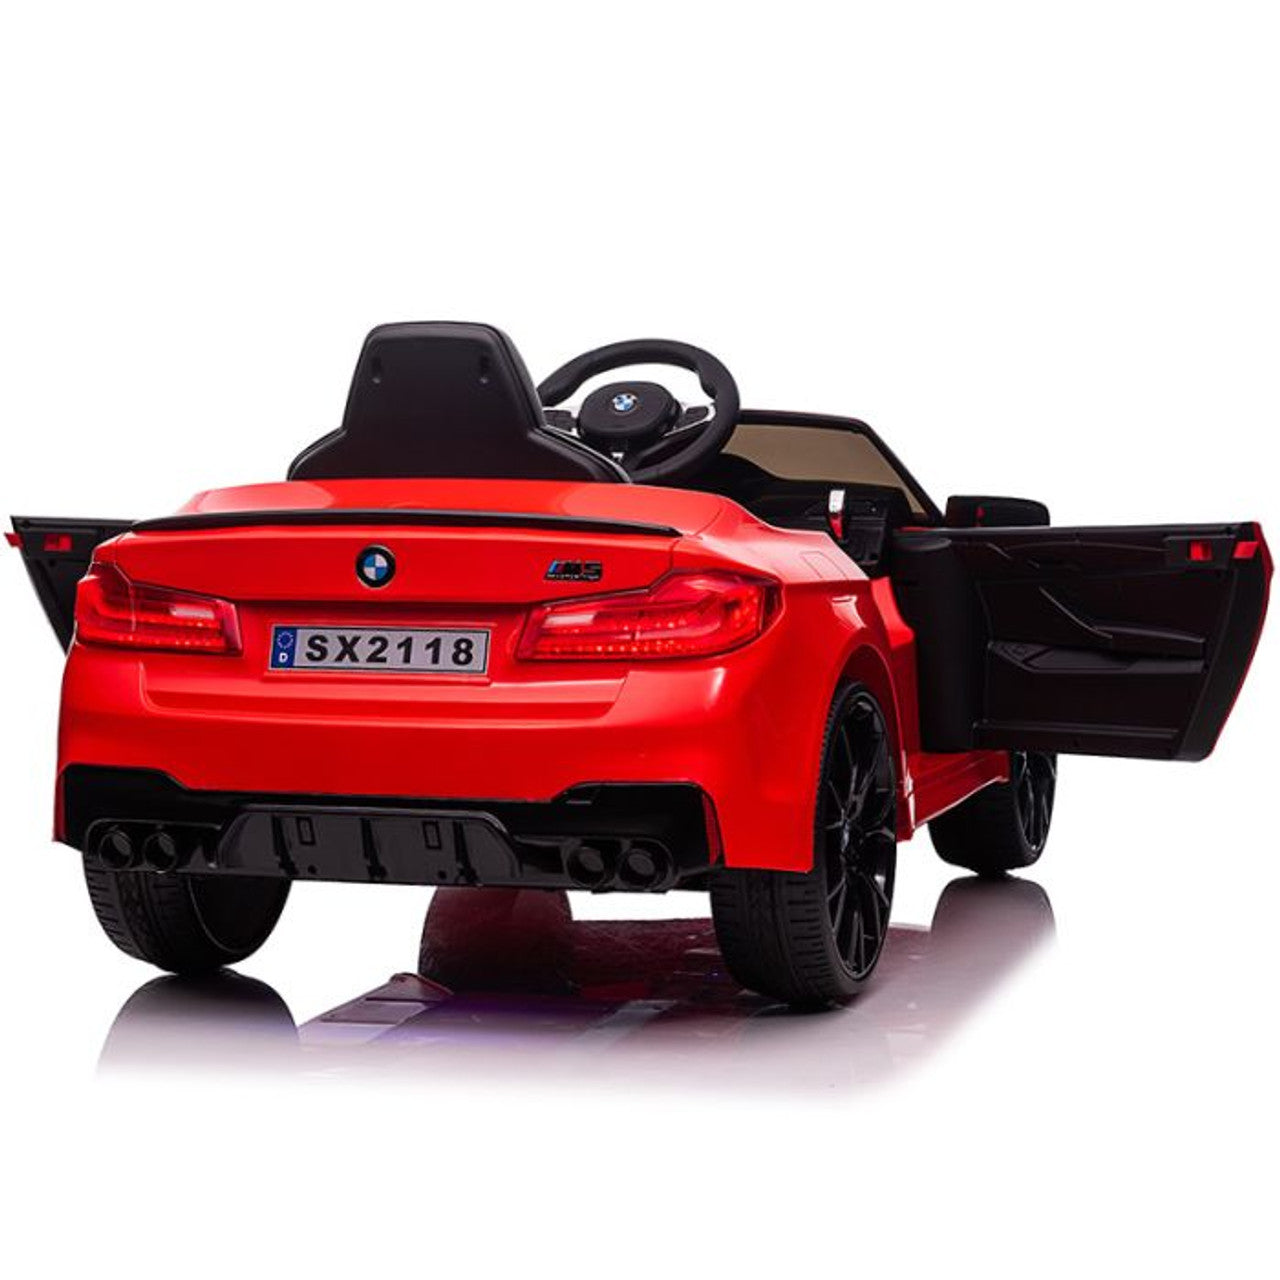 Red BMW M5 electric ride-on car with open doors for children on a white background.